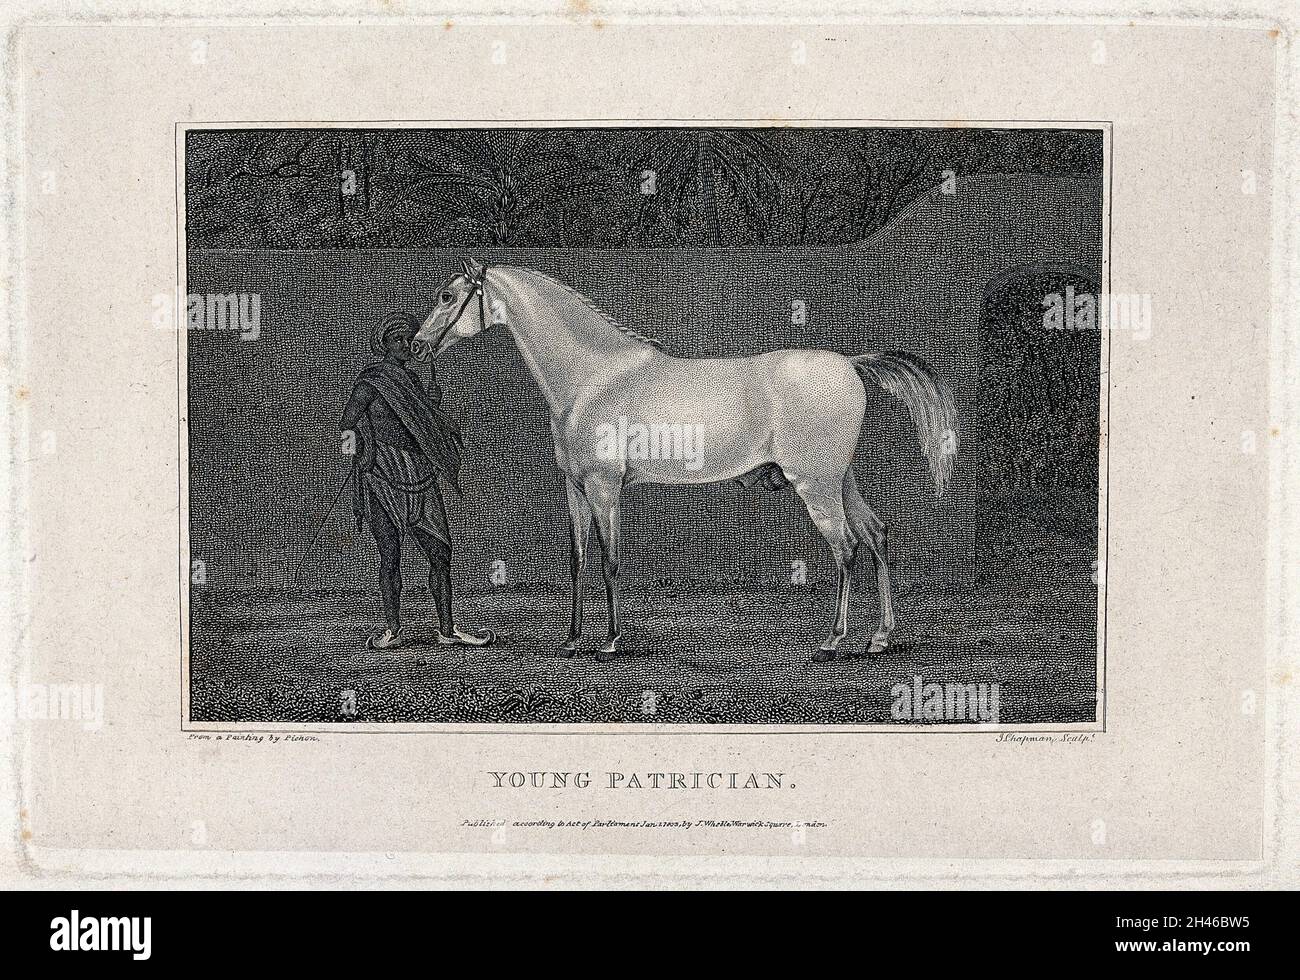 A young Indian servant is holding the stallion 'Young patrician'. Etching with engraving by J. Chapman, 1802, after a painting by J.J. Pichon. Stock Photo